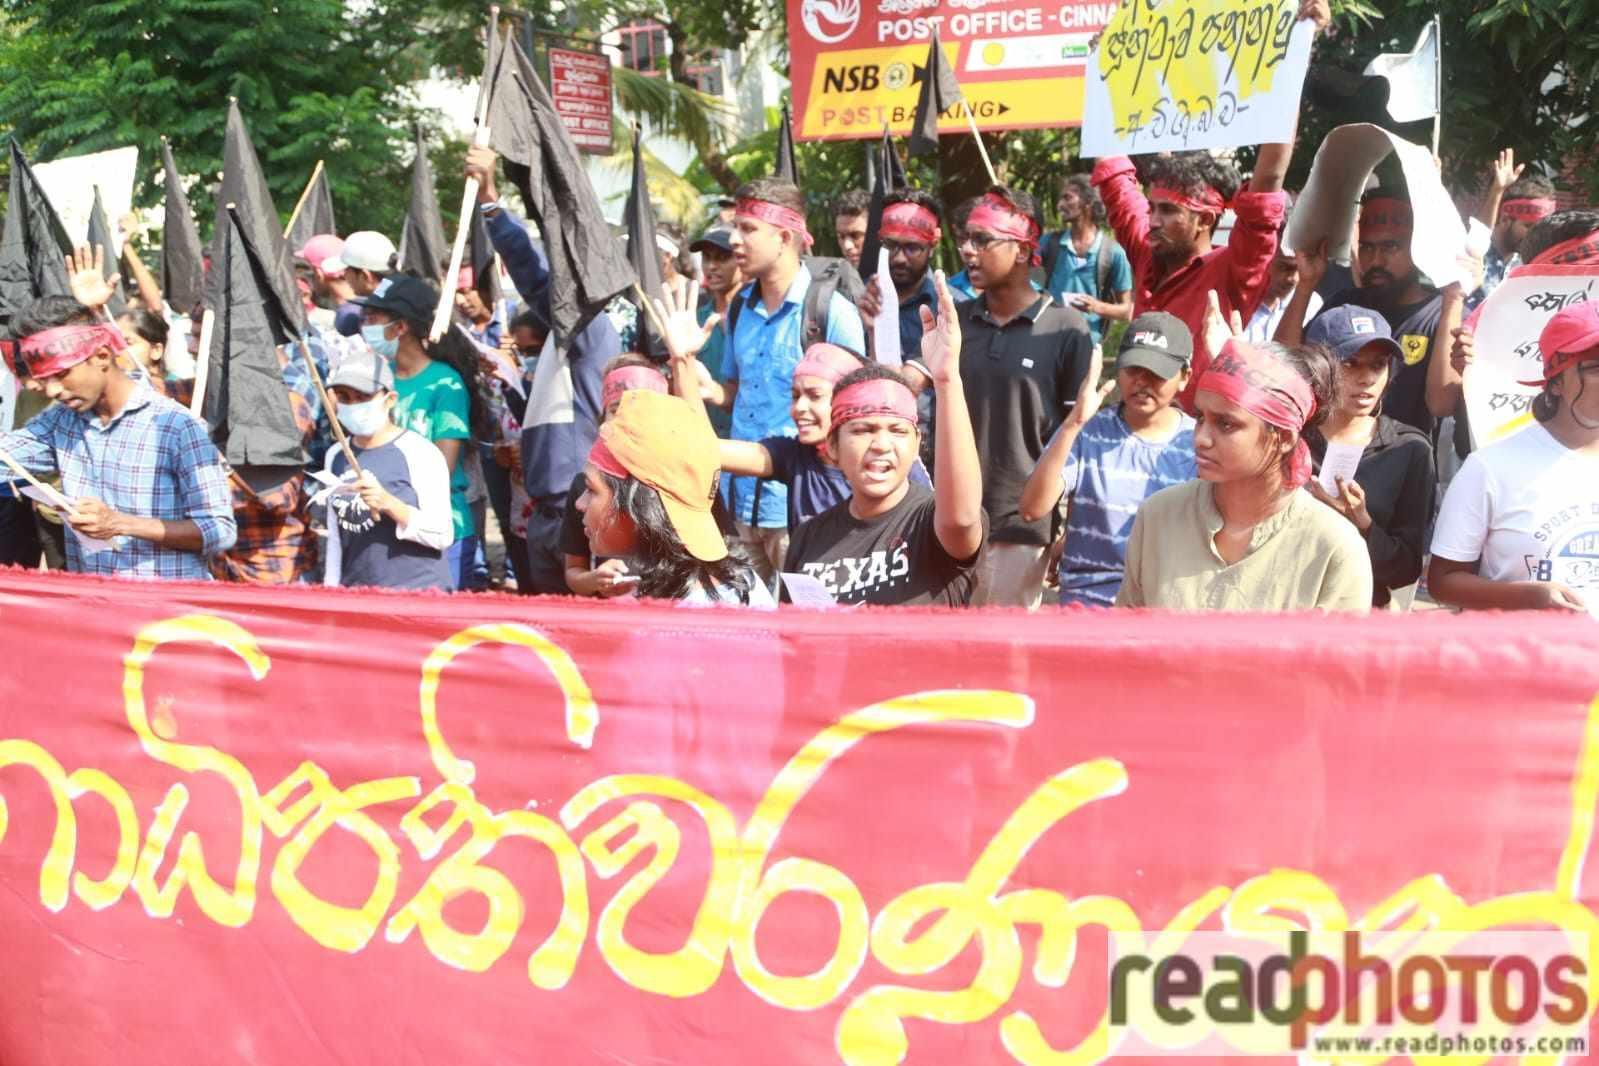 IUSF protesters in colombo 07/03 - Read Photos